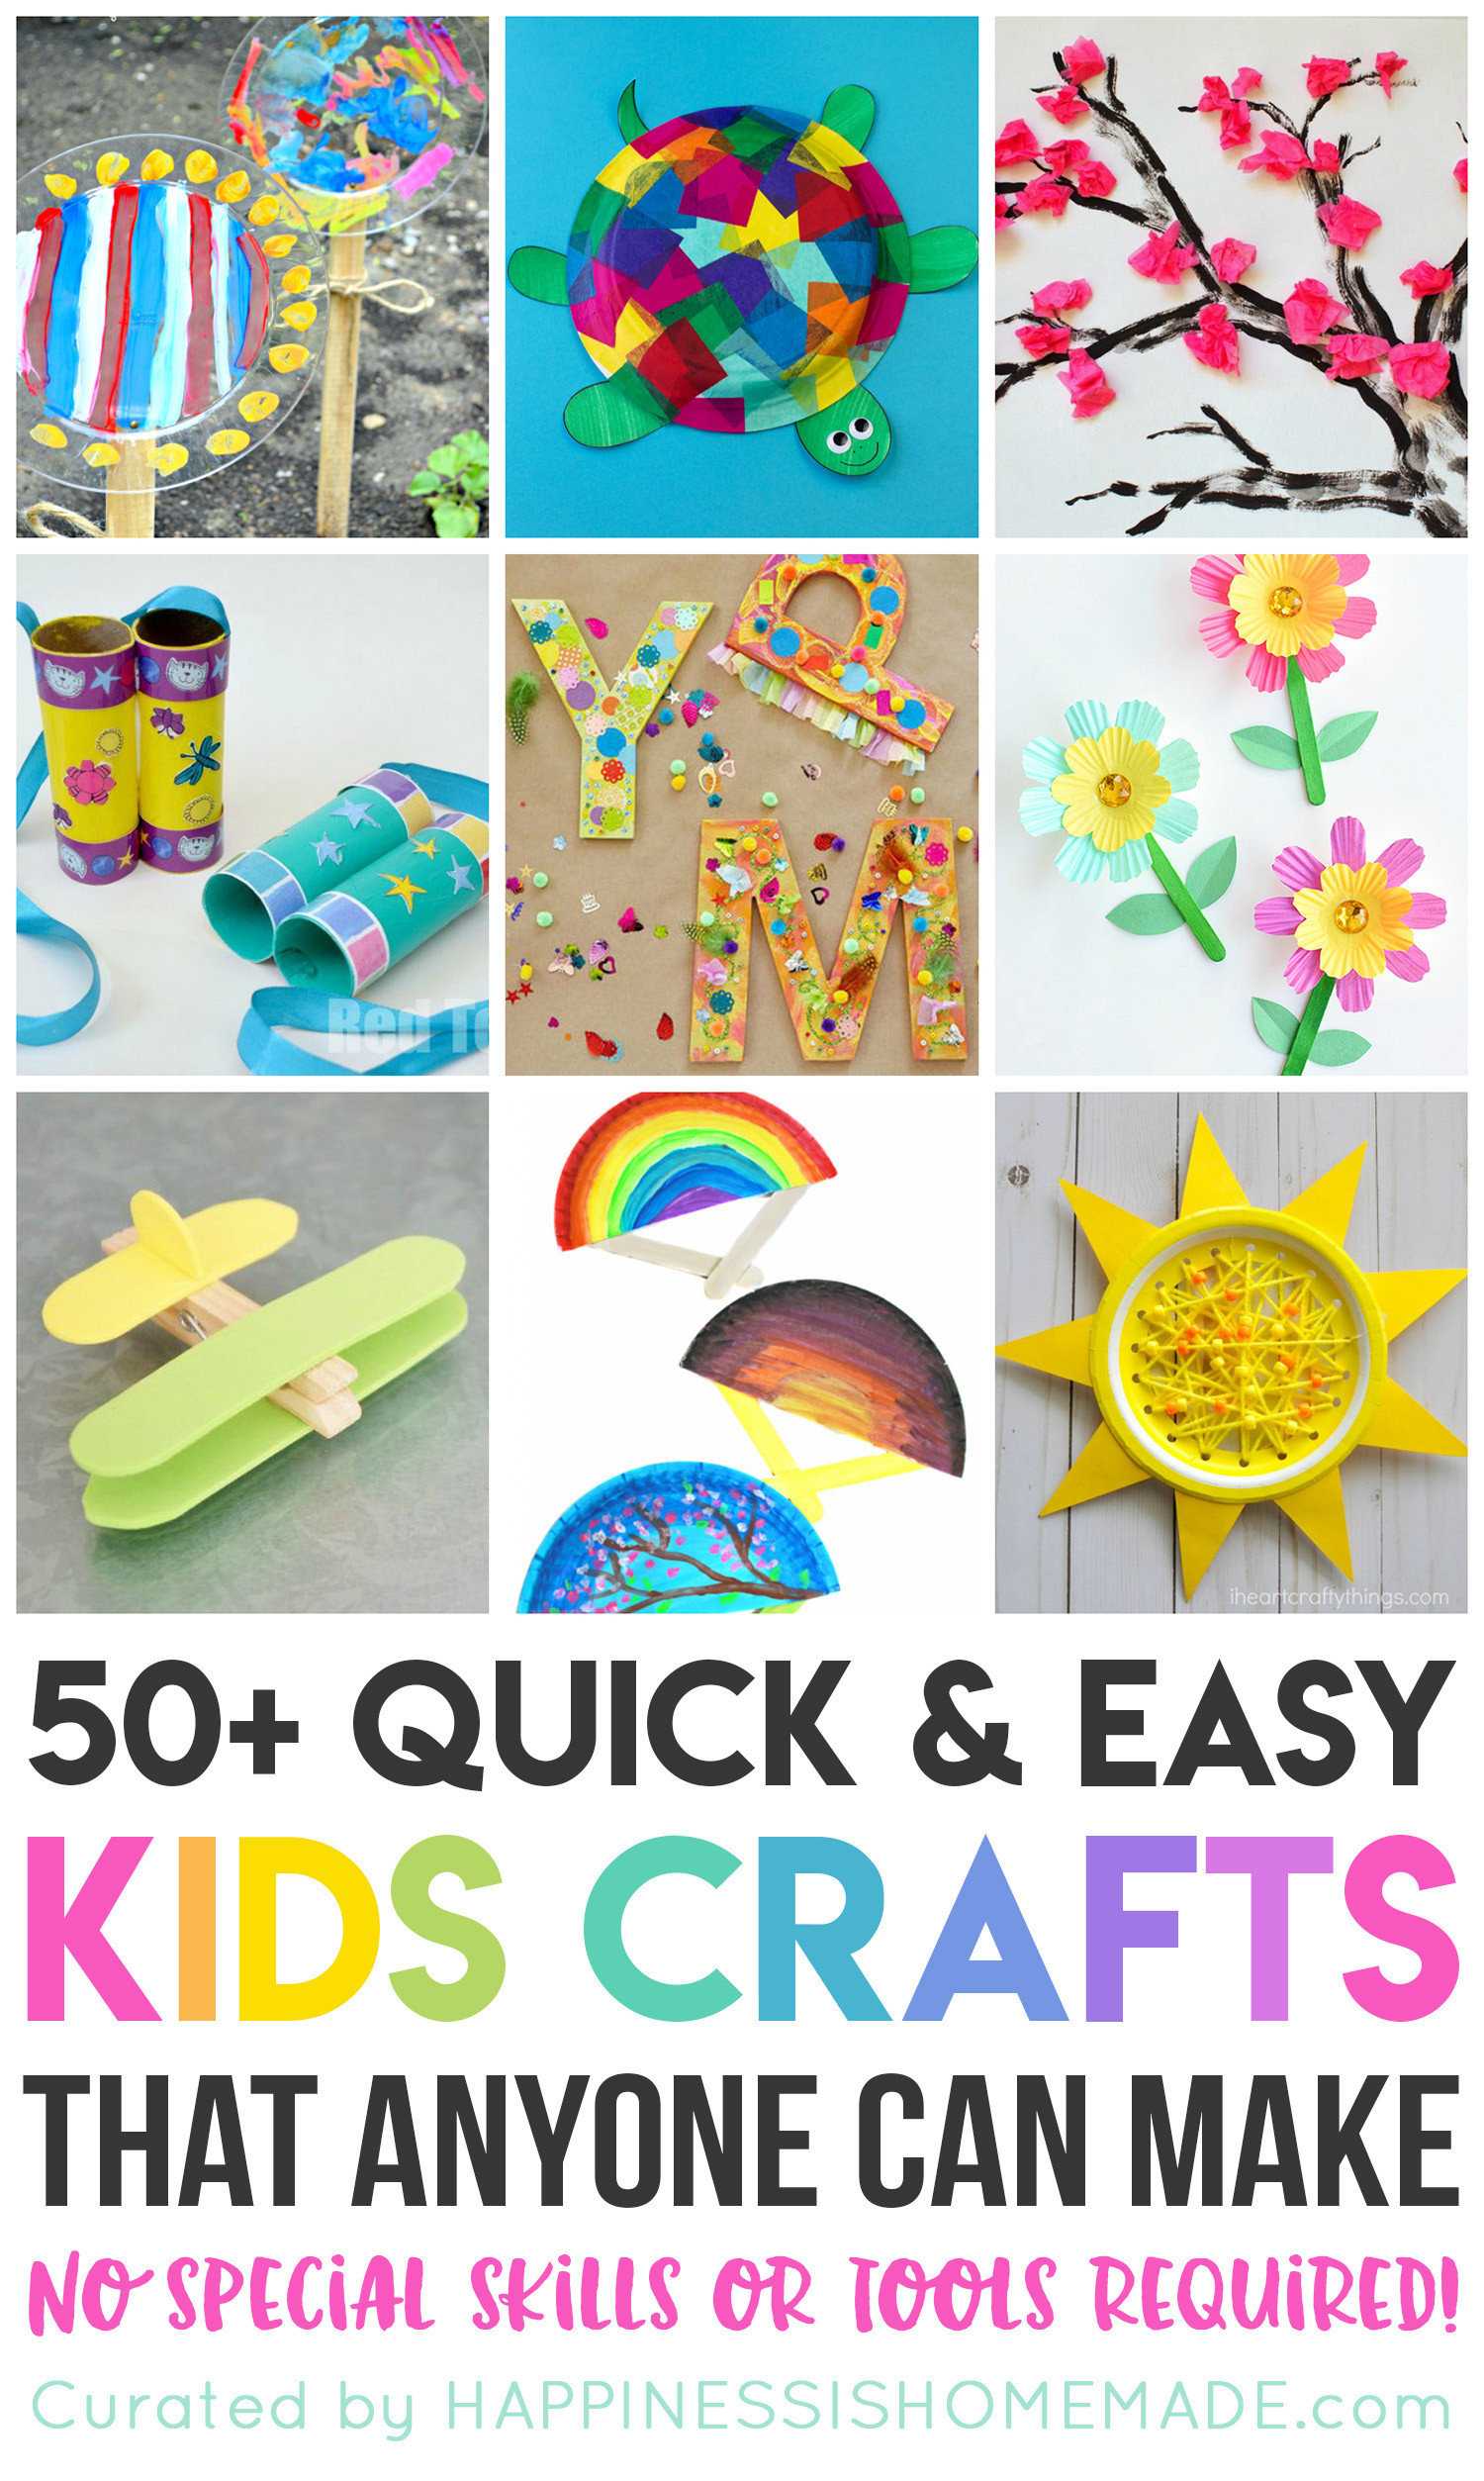 Easy Art Projects For Toddlers
 50 Quick & Easy Kids Crafts that ANYONE Can Make